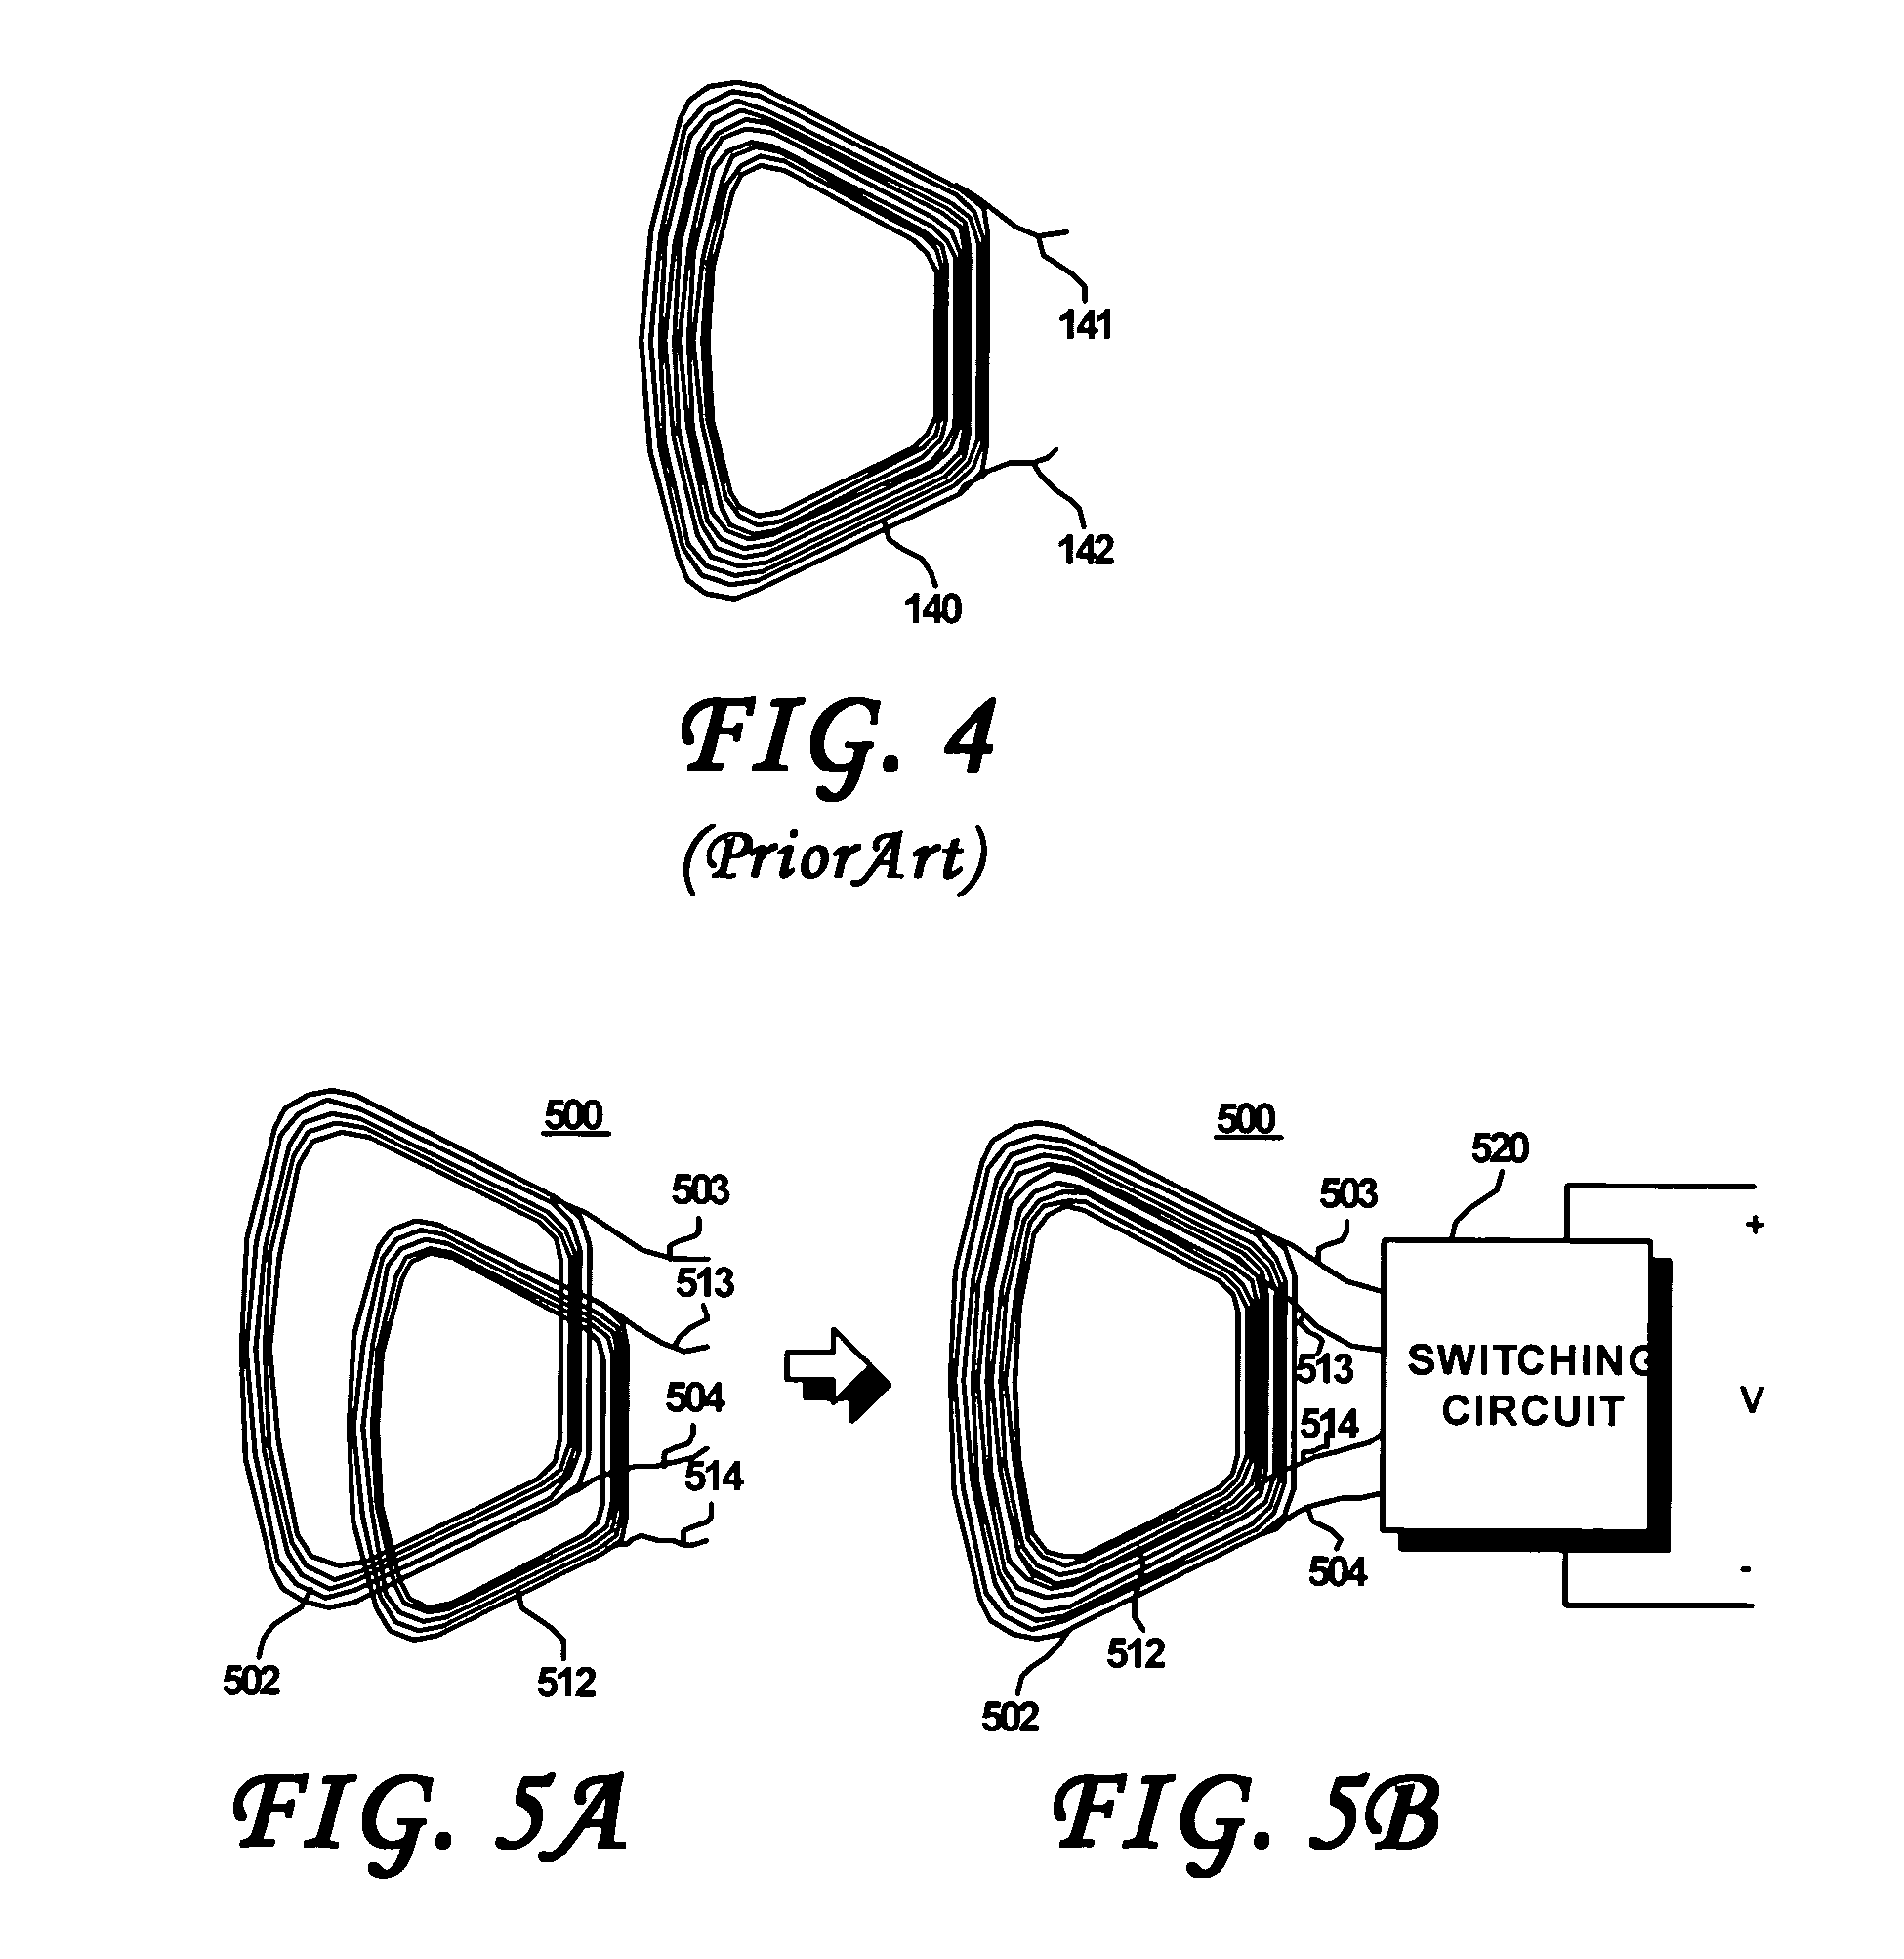 Disk drive having electrically parallel actuator coils for selectively boosting actuator torque